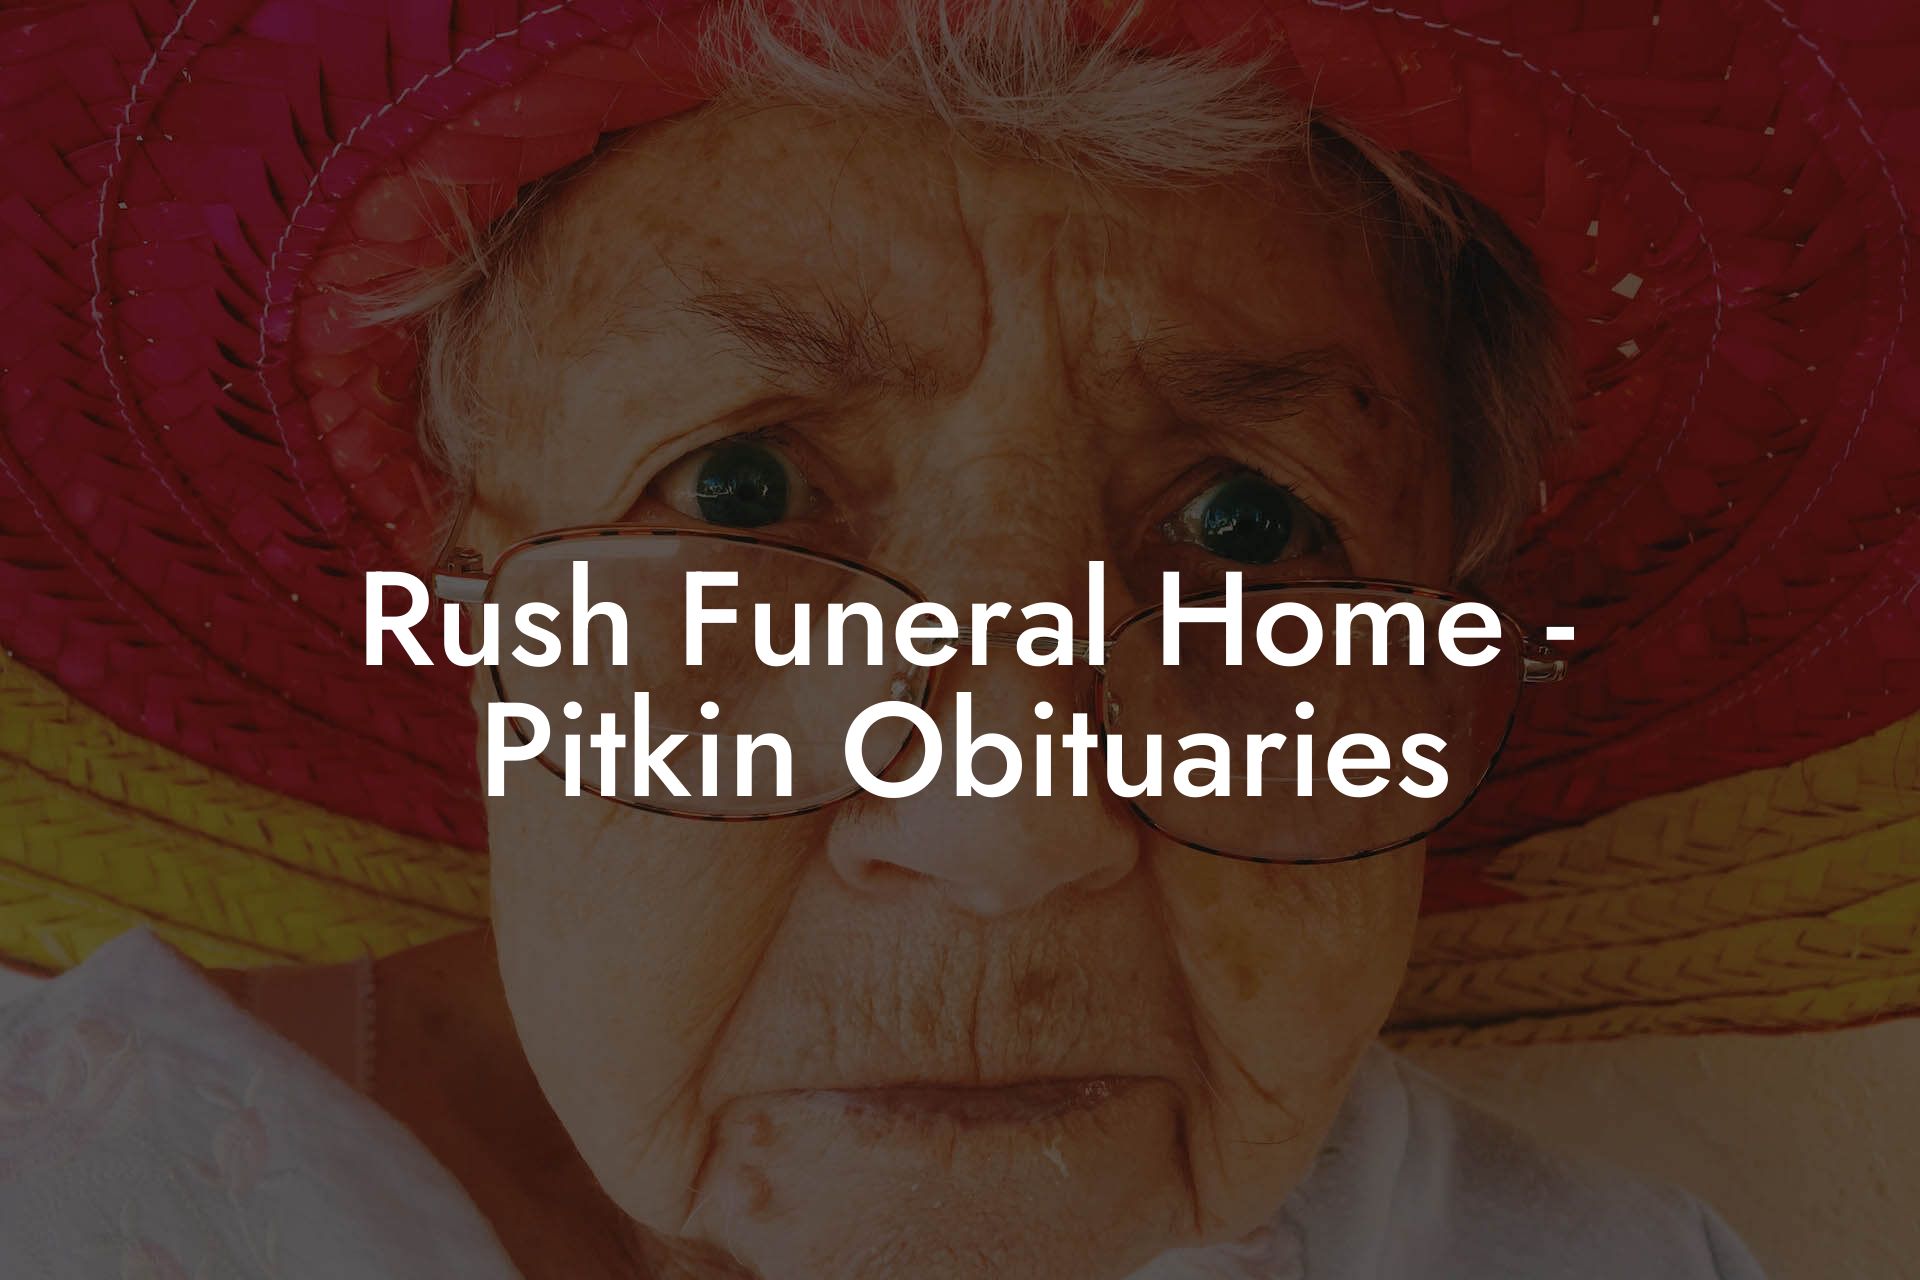 Rush Funeral Home - Pitkin Obituaries